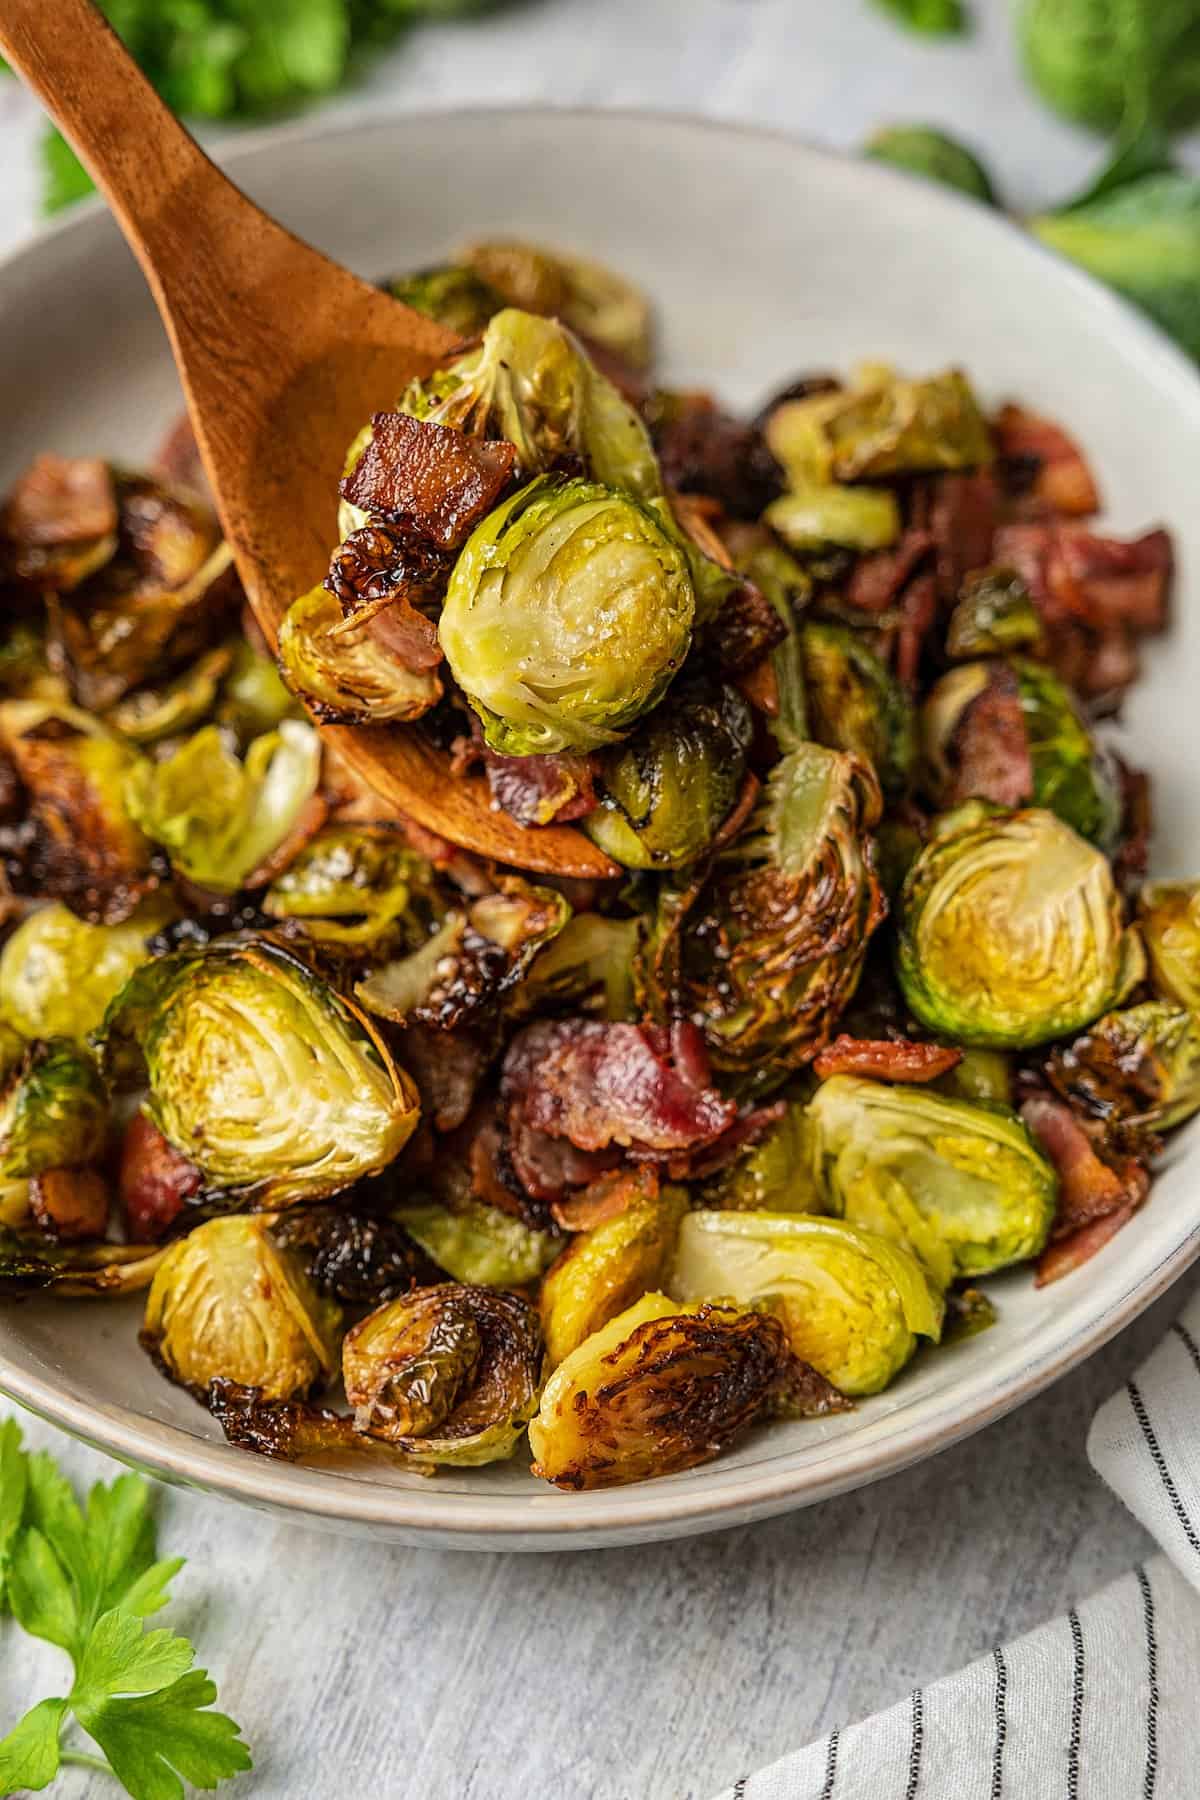 Scooping roasted Brussels sprouts and bacon out of a serving bowl with a wooden serving fork.